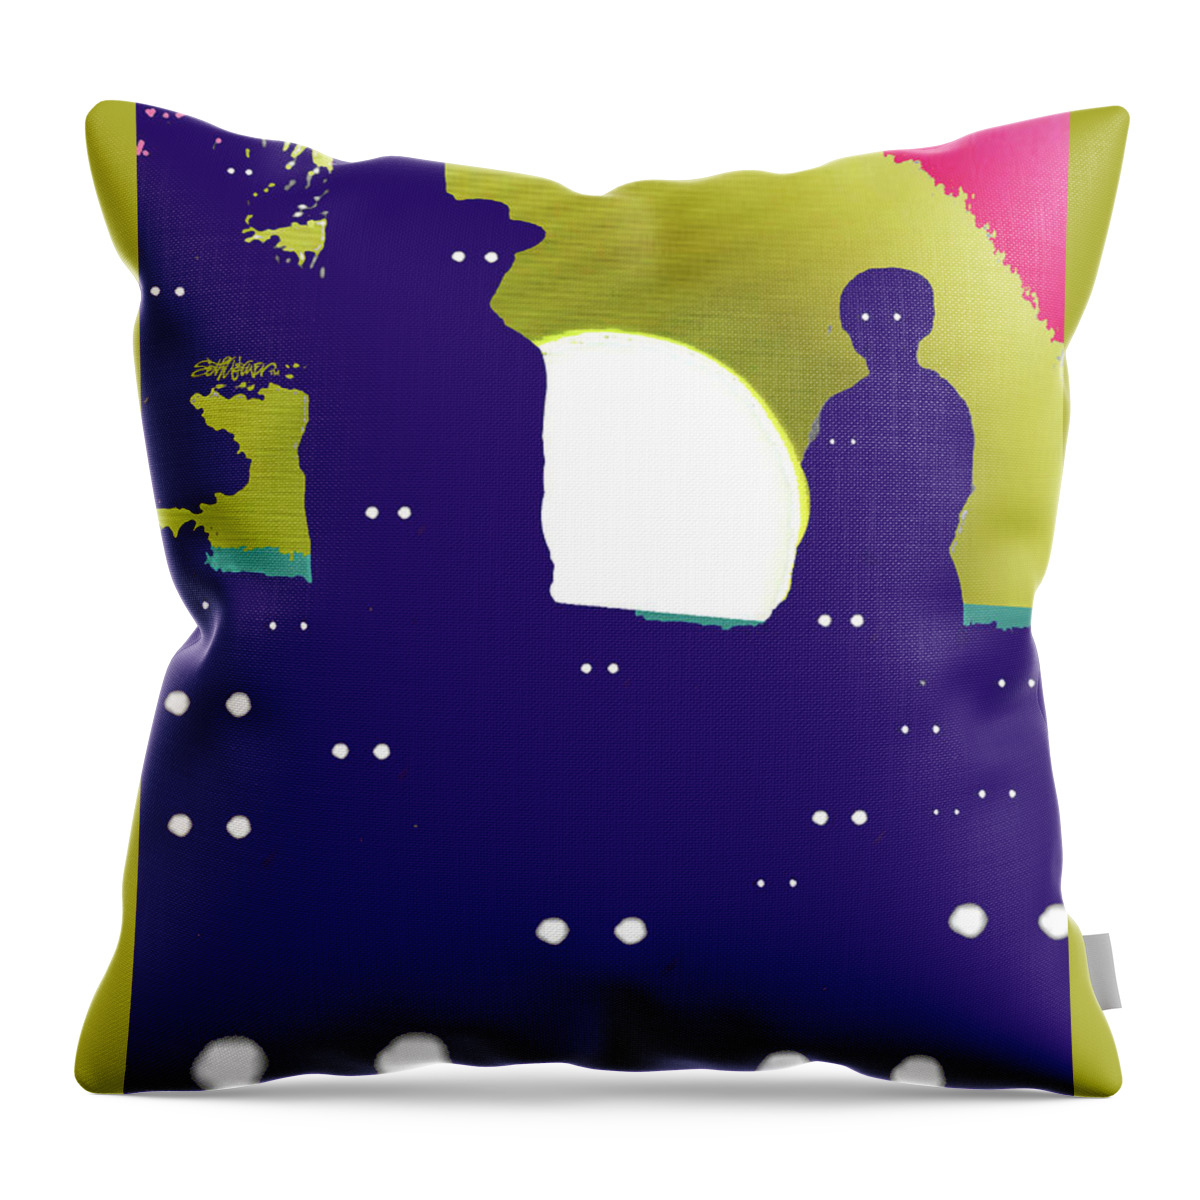 I Hear Something In The Woods Throw Pillow featuring the digital art I Hear Something in the Woods? by Seth Weaver